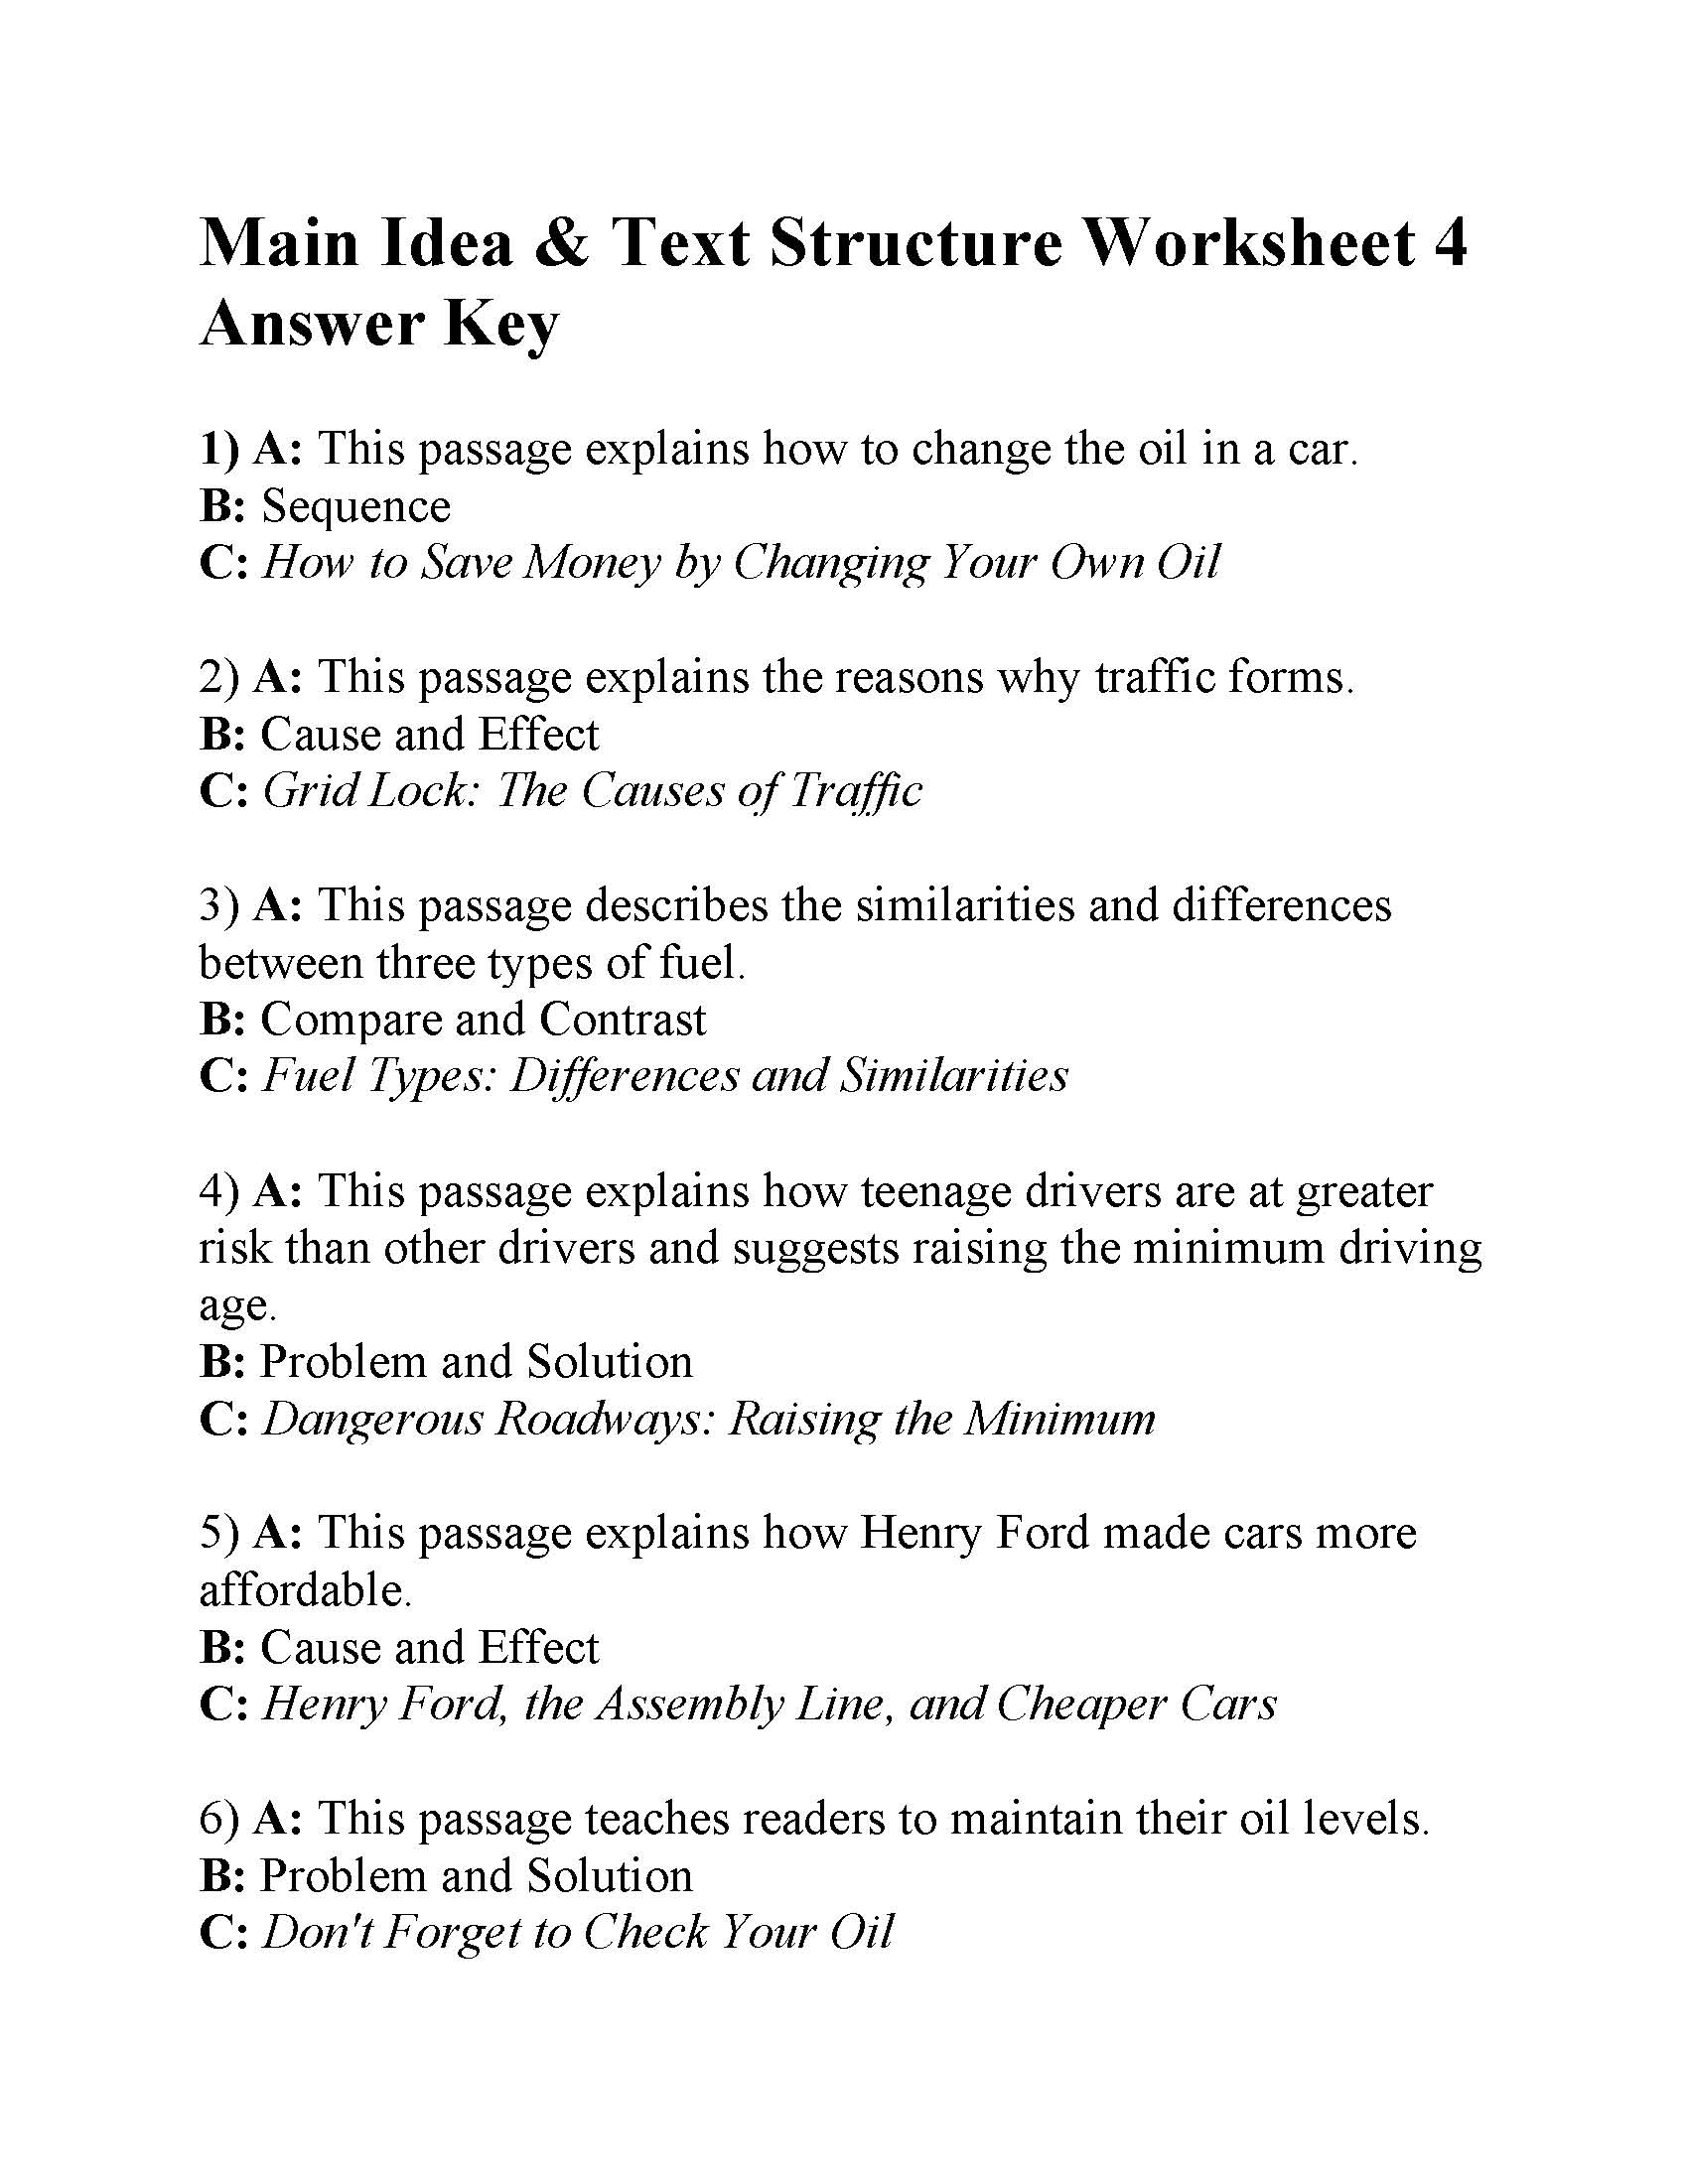 Main Idea and Text Structure Worksheet 22  Answers Inside Main Idea Worksheet 4